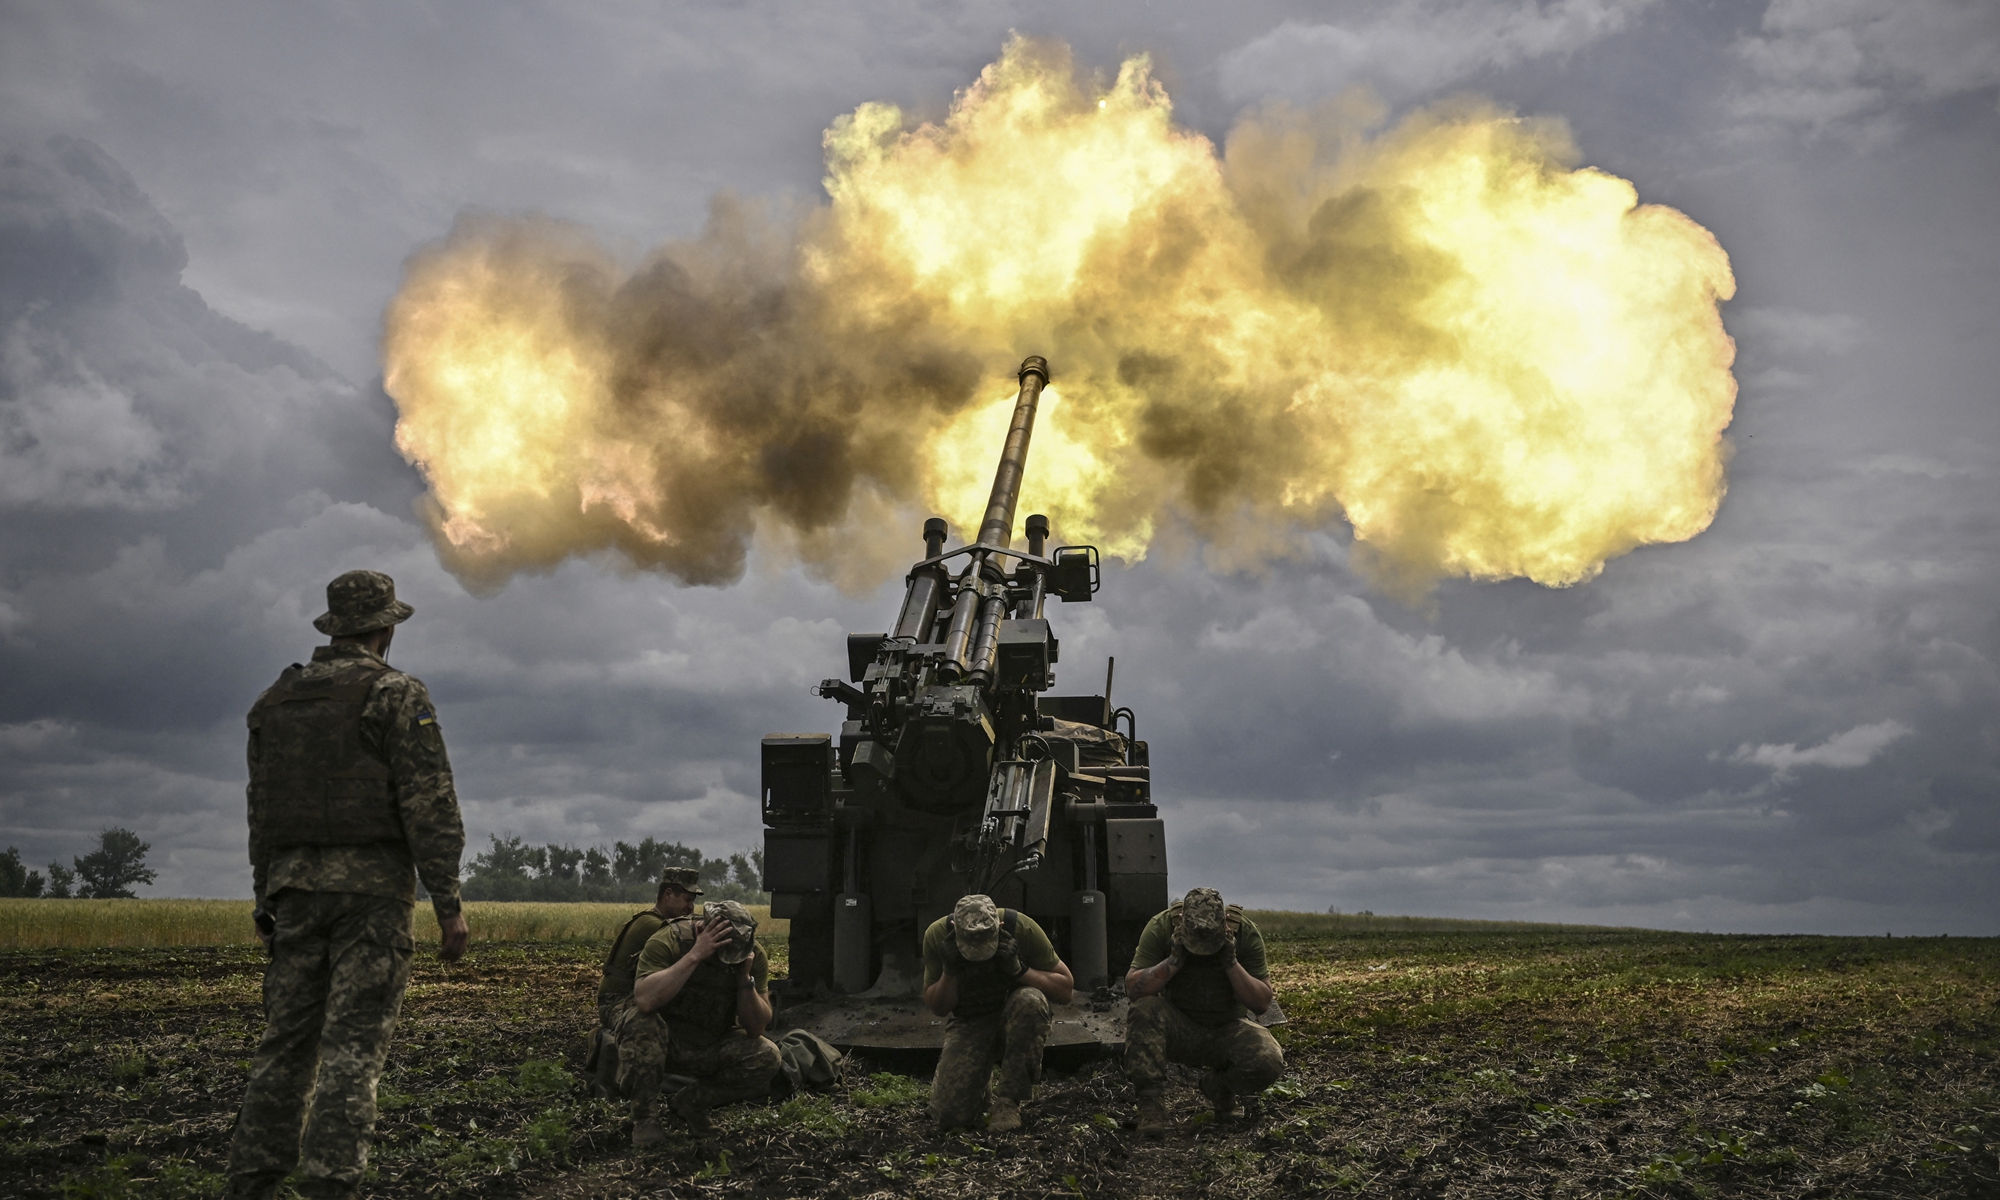 Ukrainian servicemen fire French self-propelled 155 mm/52-calibre gun Caesar at a frontline in the eastern region of Donbass on June 15, 2022. Ukraine pleaded with Western governments to decide quickly on sending heavy weapons to shore up its faltering defenses. Photo: AFP